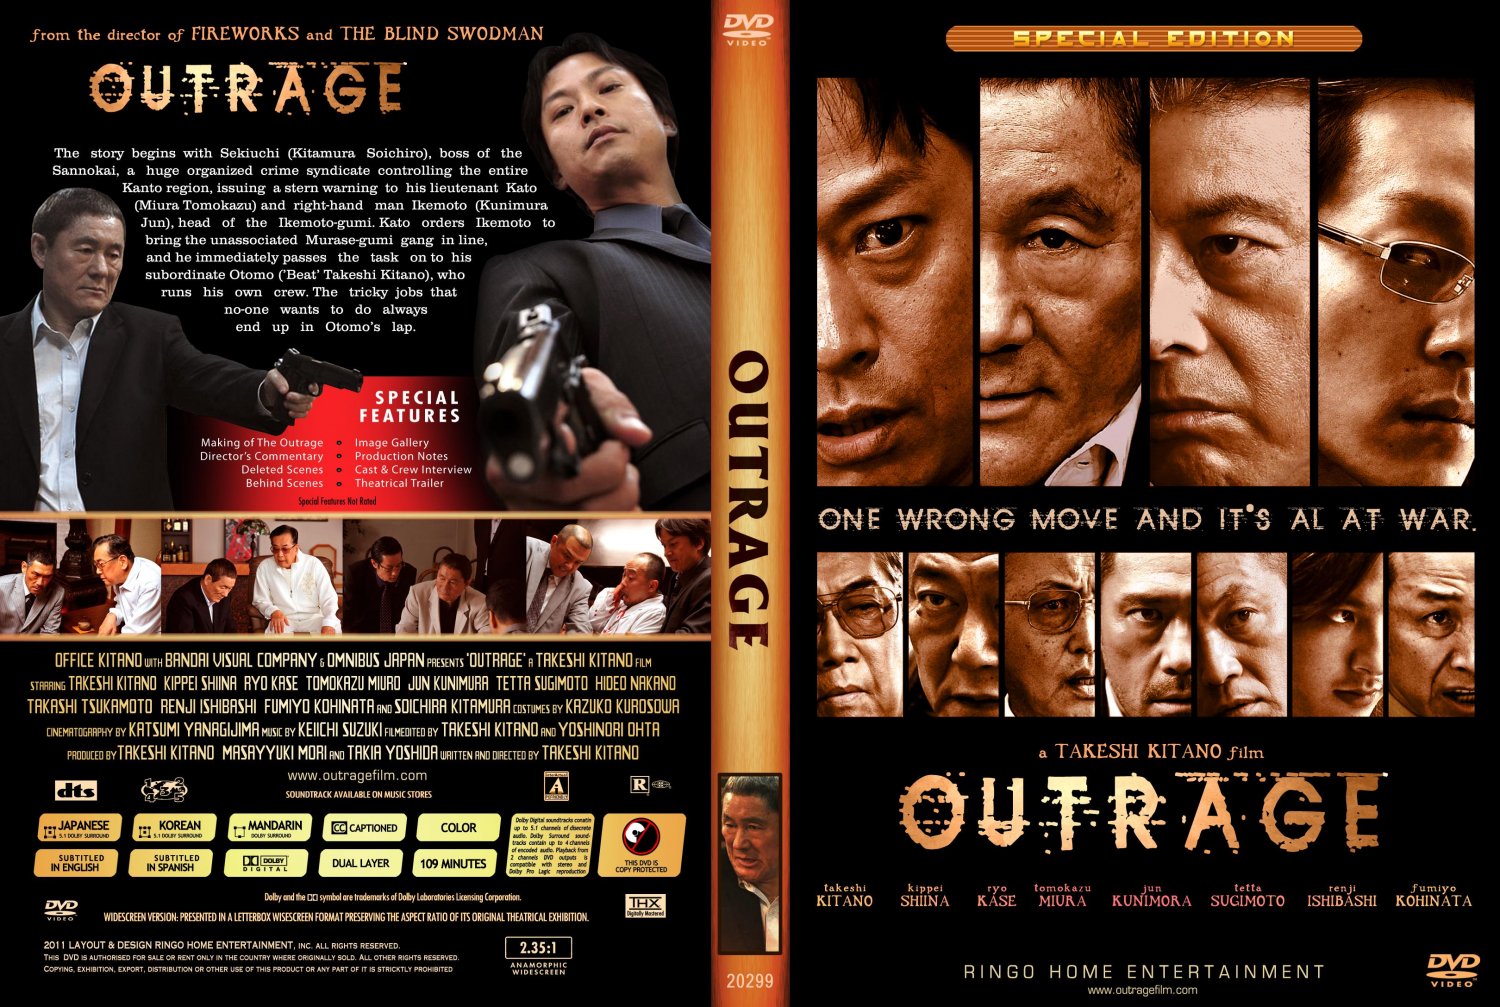 Movie Covers DVD Cases